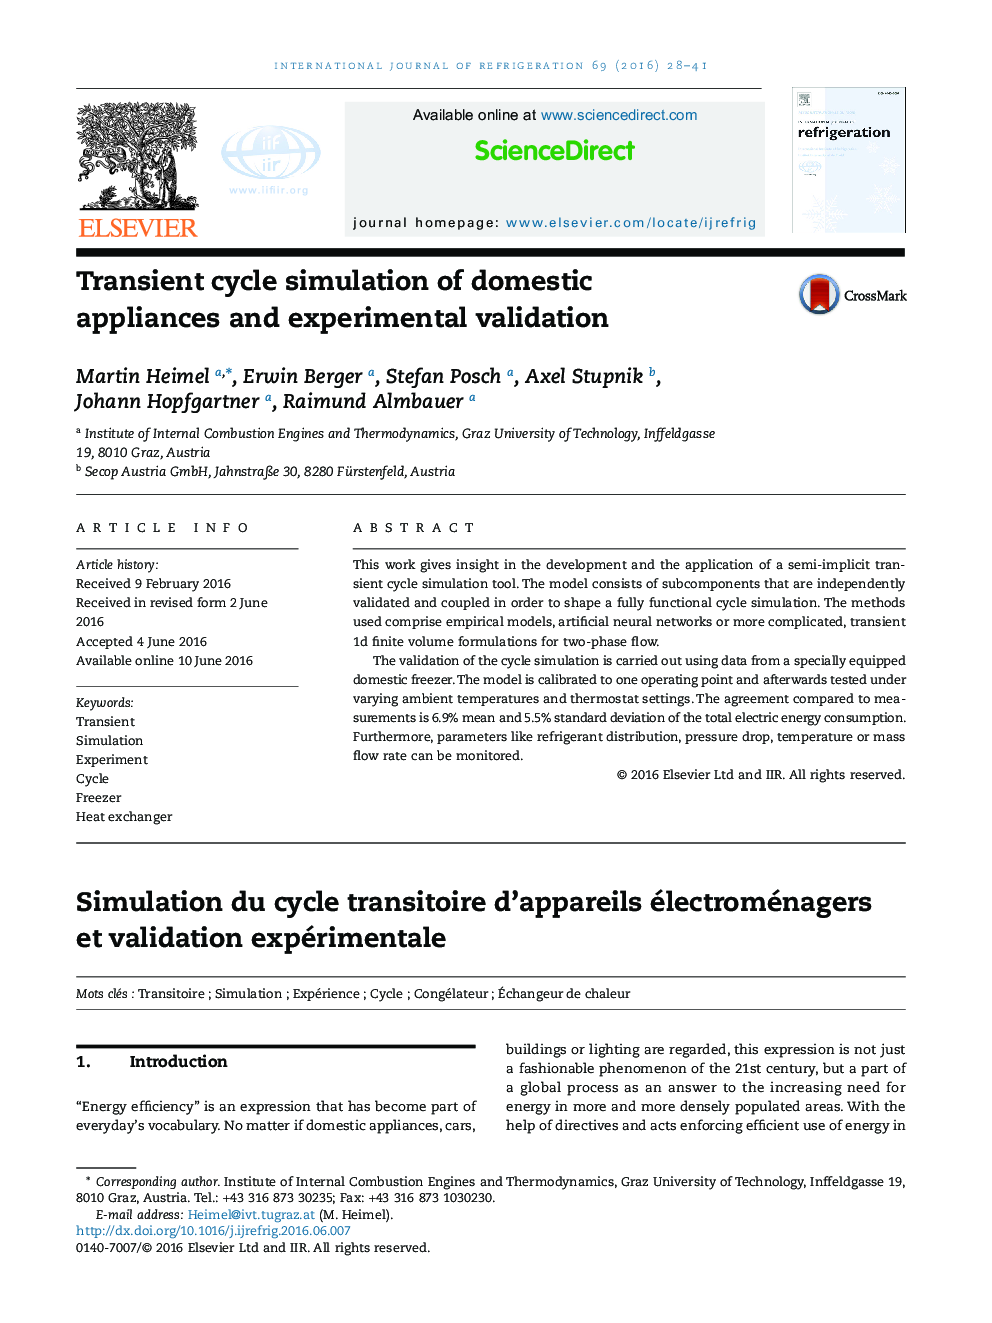 Transient cycle simulation of domestic appliances and experimental validation